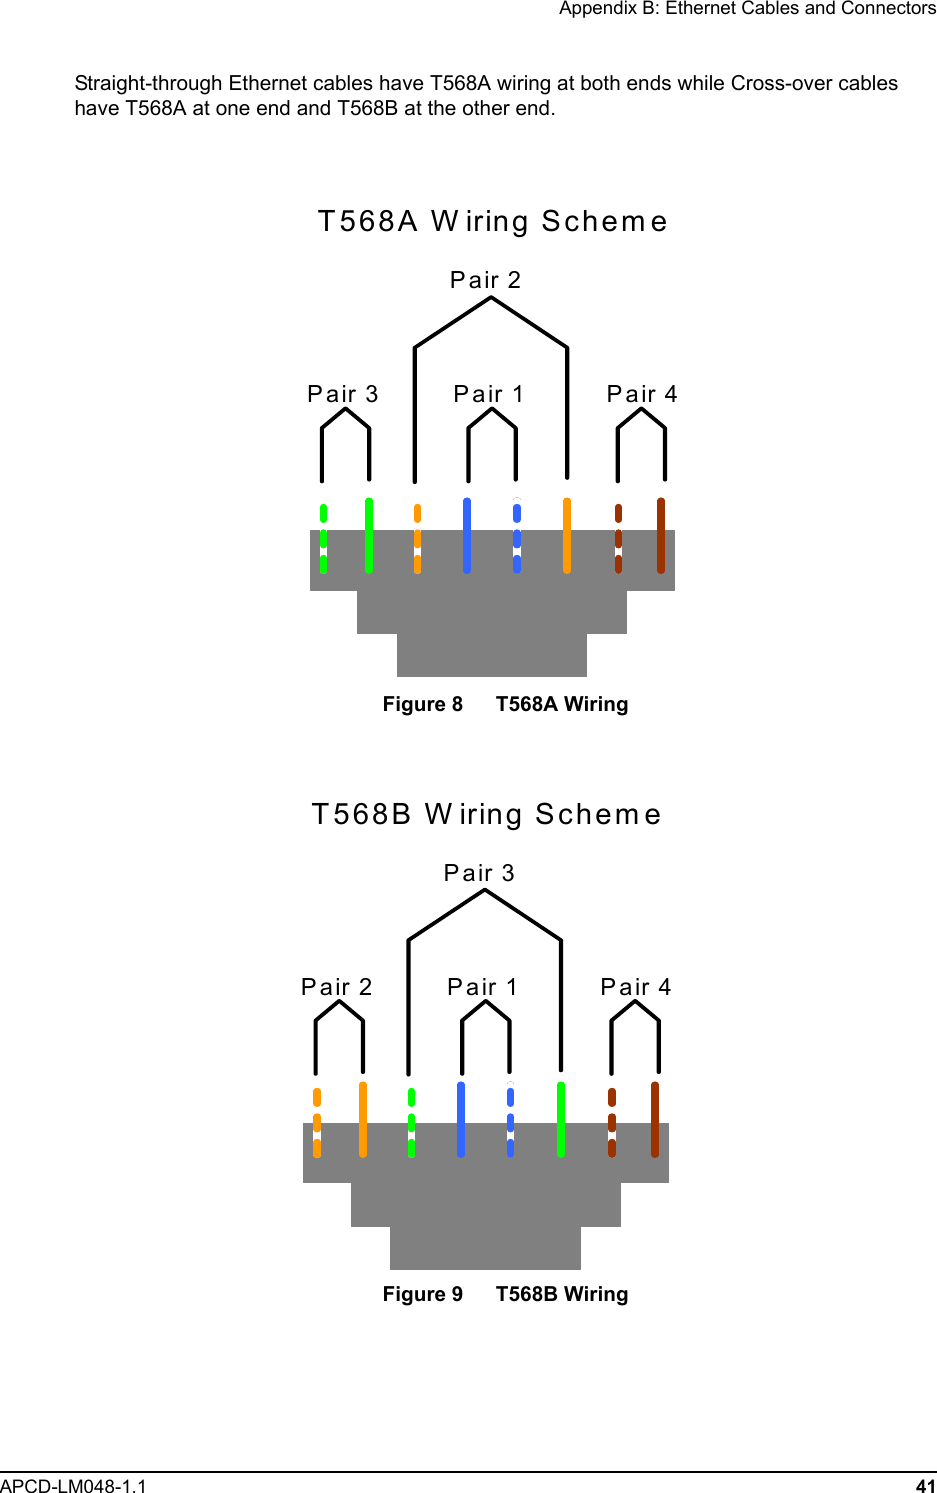 Appendix B: Ethernet Cables and ConnectorsAPCD-LM048-1.1 41Straight-through Ethernet cables have T568A wiring at both ends while Cross-over cables have T568A at one end and T568B at the other end.Figure 8   T568A WiringFigure 9   T568B WiringPair 2T568A W iring SchemePair 3 Pair 1 Pair 4T568B W iring SchemePair 3Pair 2 Pair 1 Pair 4